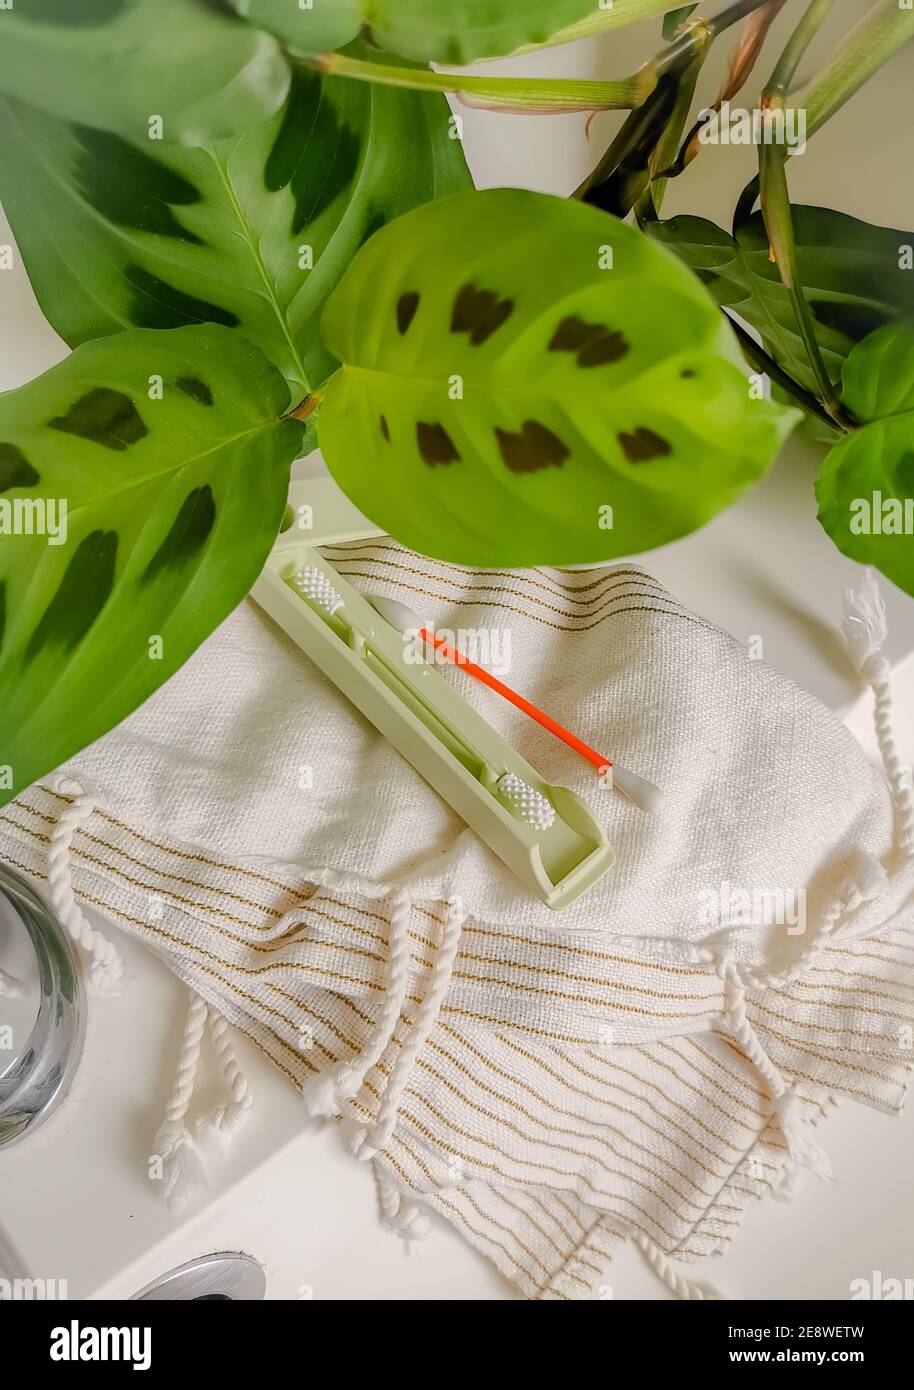 Reusable silicone ear swabs on a bathroom counter. SIngle-use plastic free swap. Sustainable lifestyle. Stock Photo